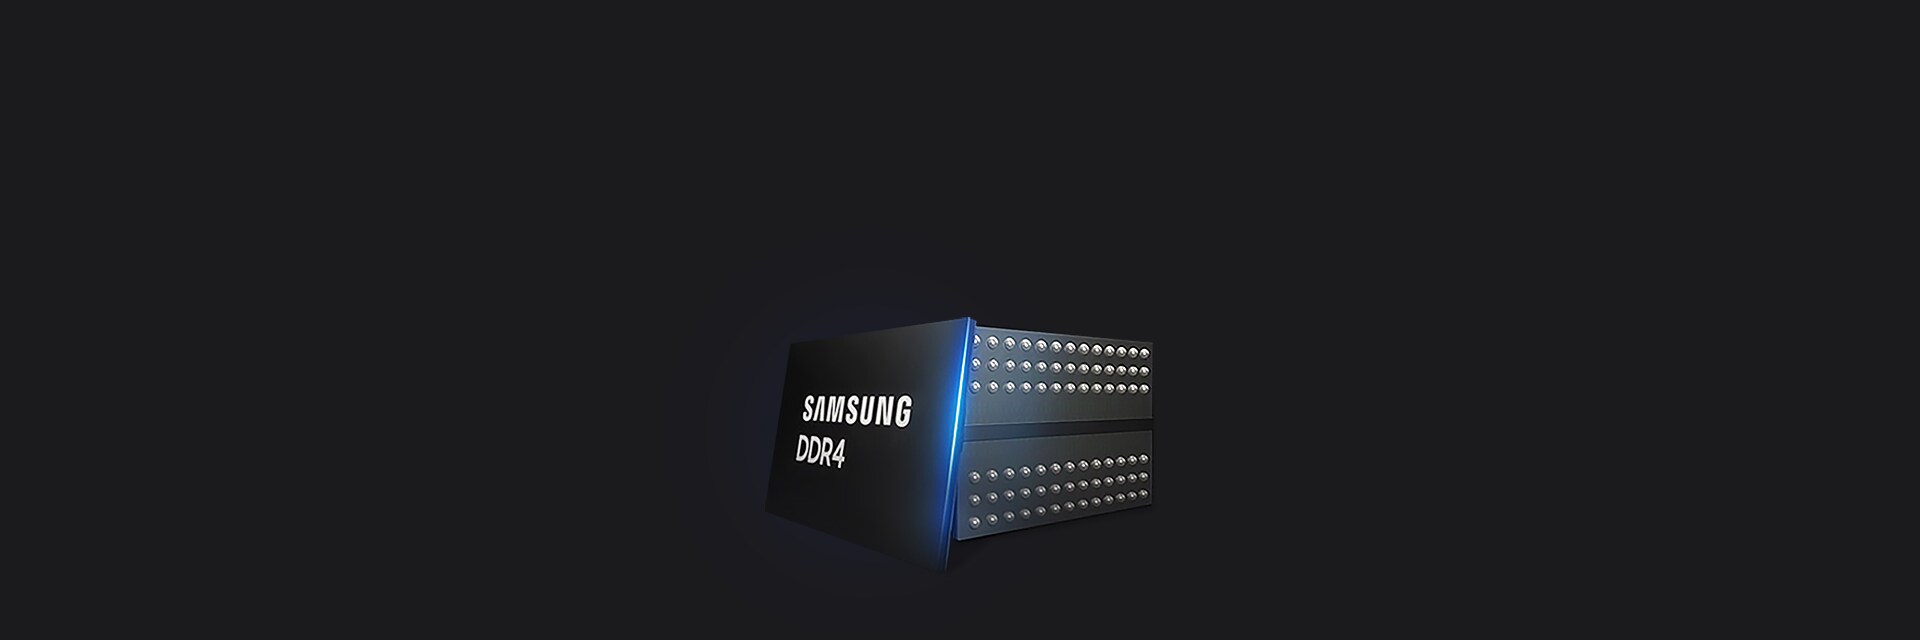 https://image.semiconductor.samsung.com/image/samsung/p6/semiconductor/products/dram/ddr/ddr4/ddr4_kv_pc_04.png?$ORIGIN_PNG$